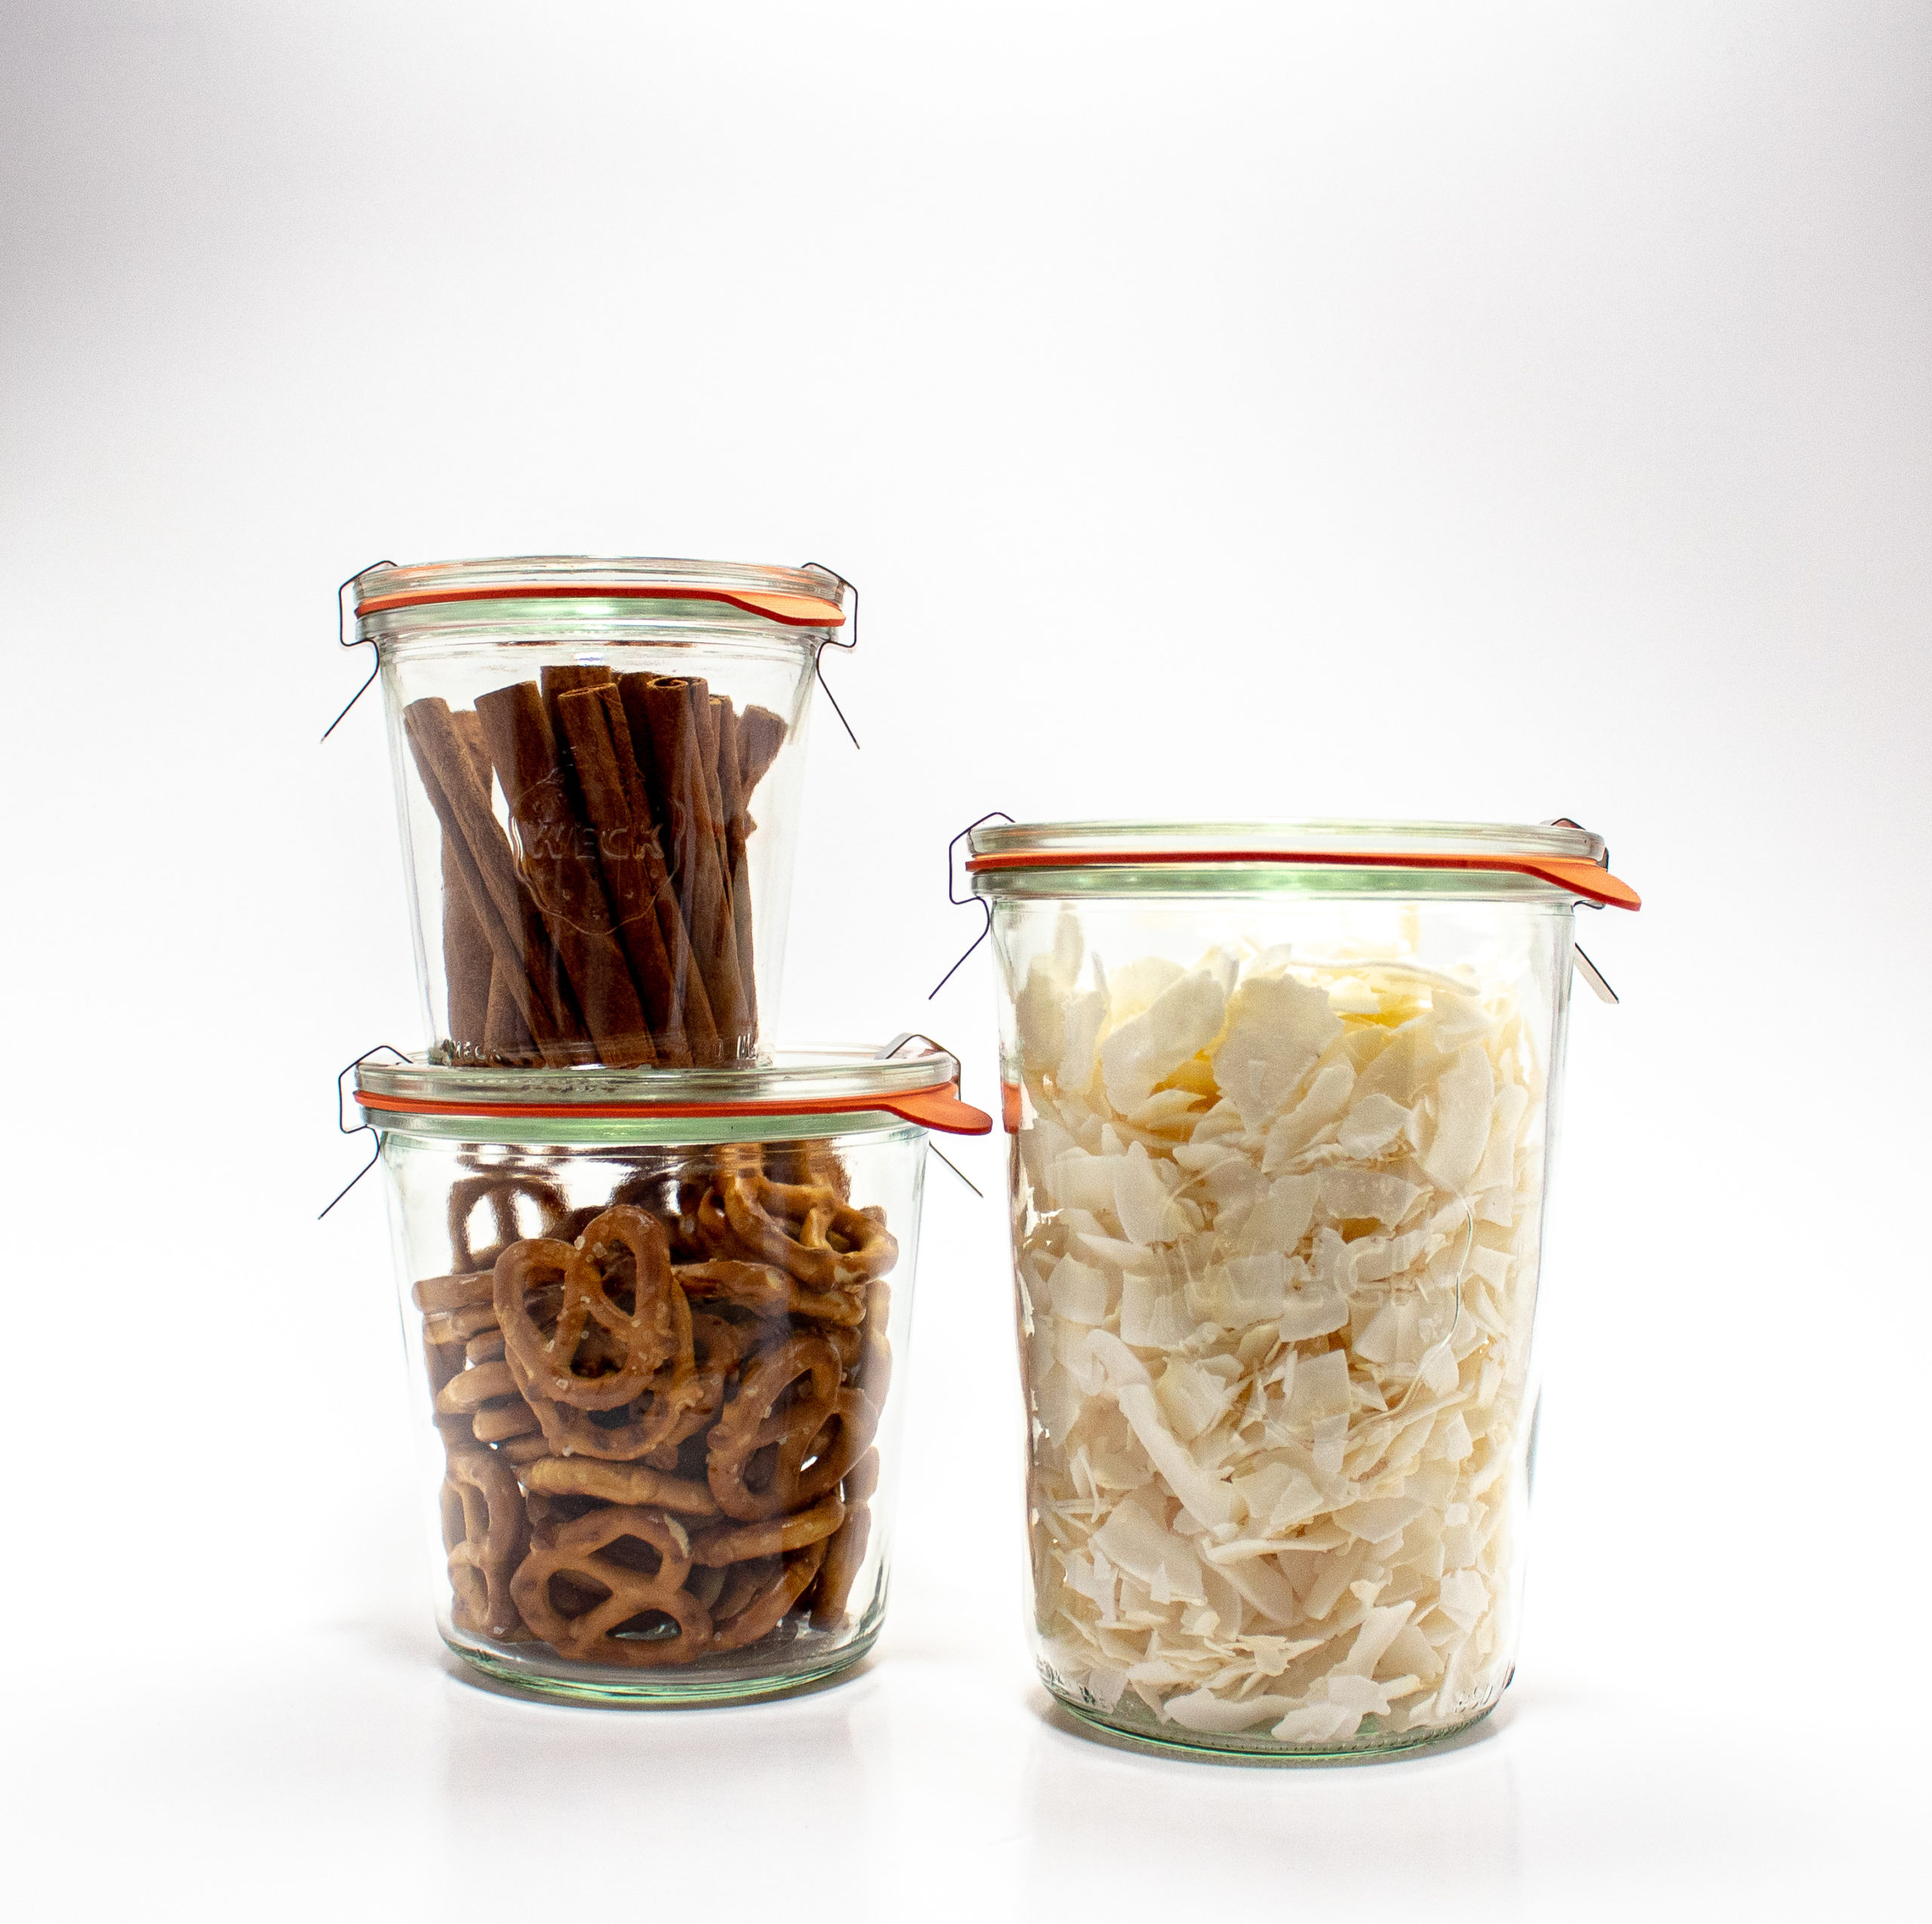 Mold Jar Combo Pack (1 of each) - Weck Jars